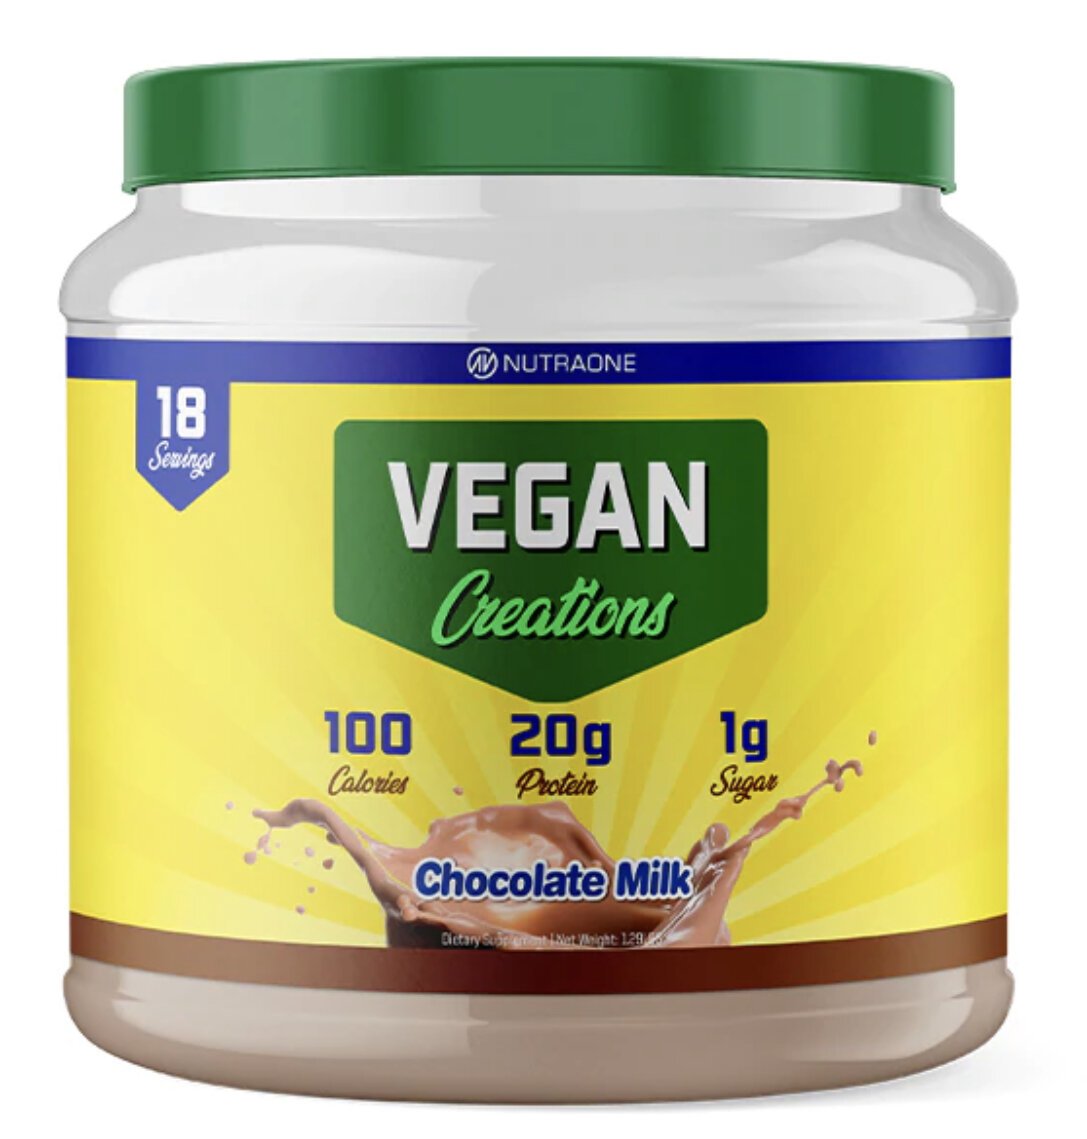 NutraOne- Vegan Creations- Plant Based Protein 18 Servings - Krazy Muscle Nutrition vendor-unknownSQ3148332